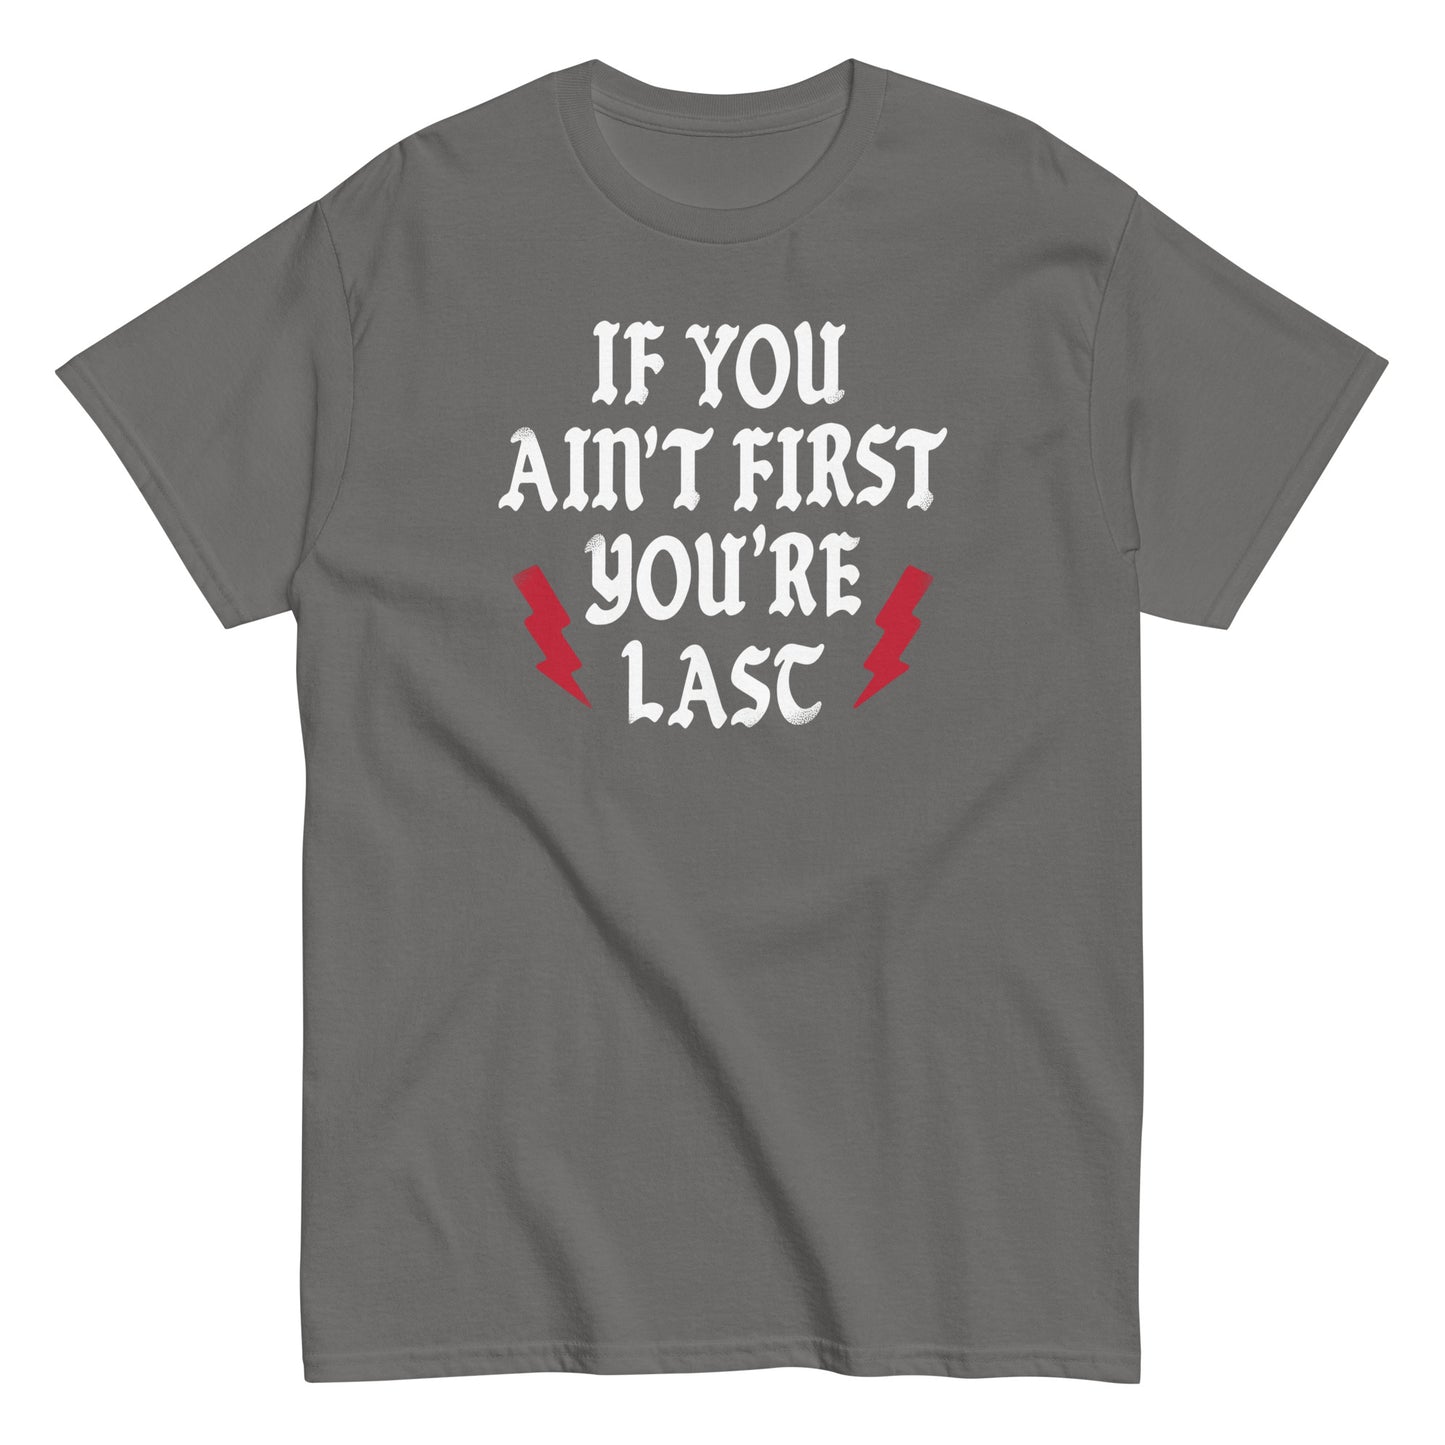 If You Ain't First You're Last Men's Classic Tee